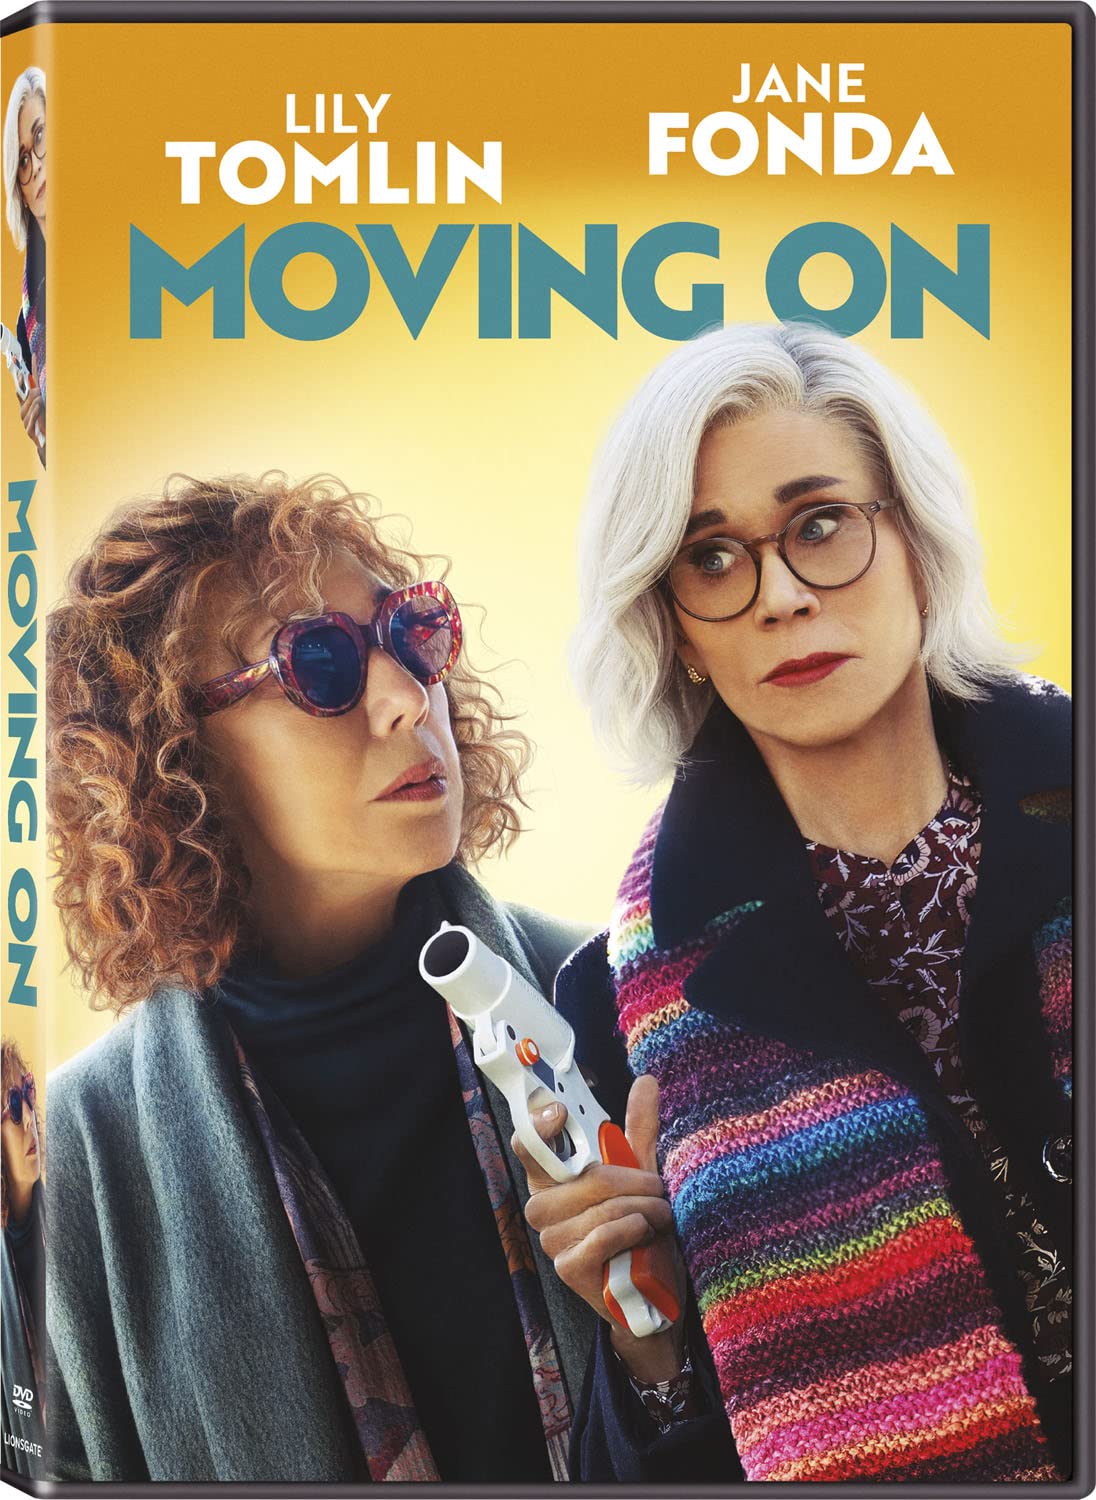 Image for "Moving on"